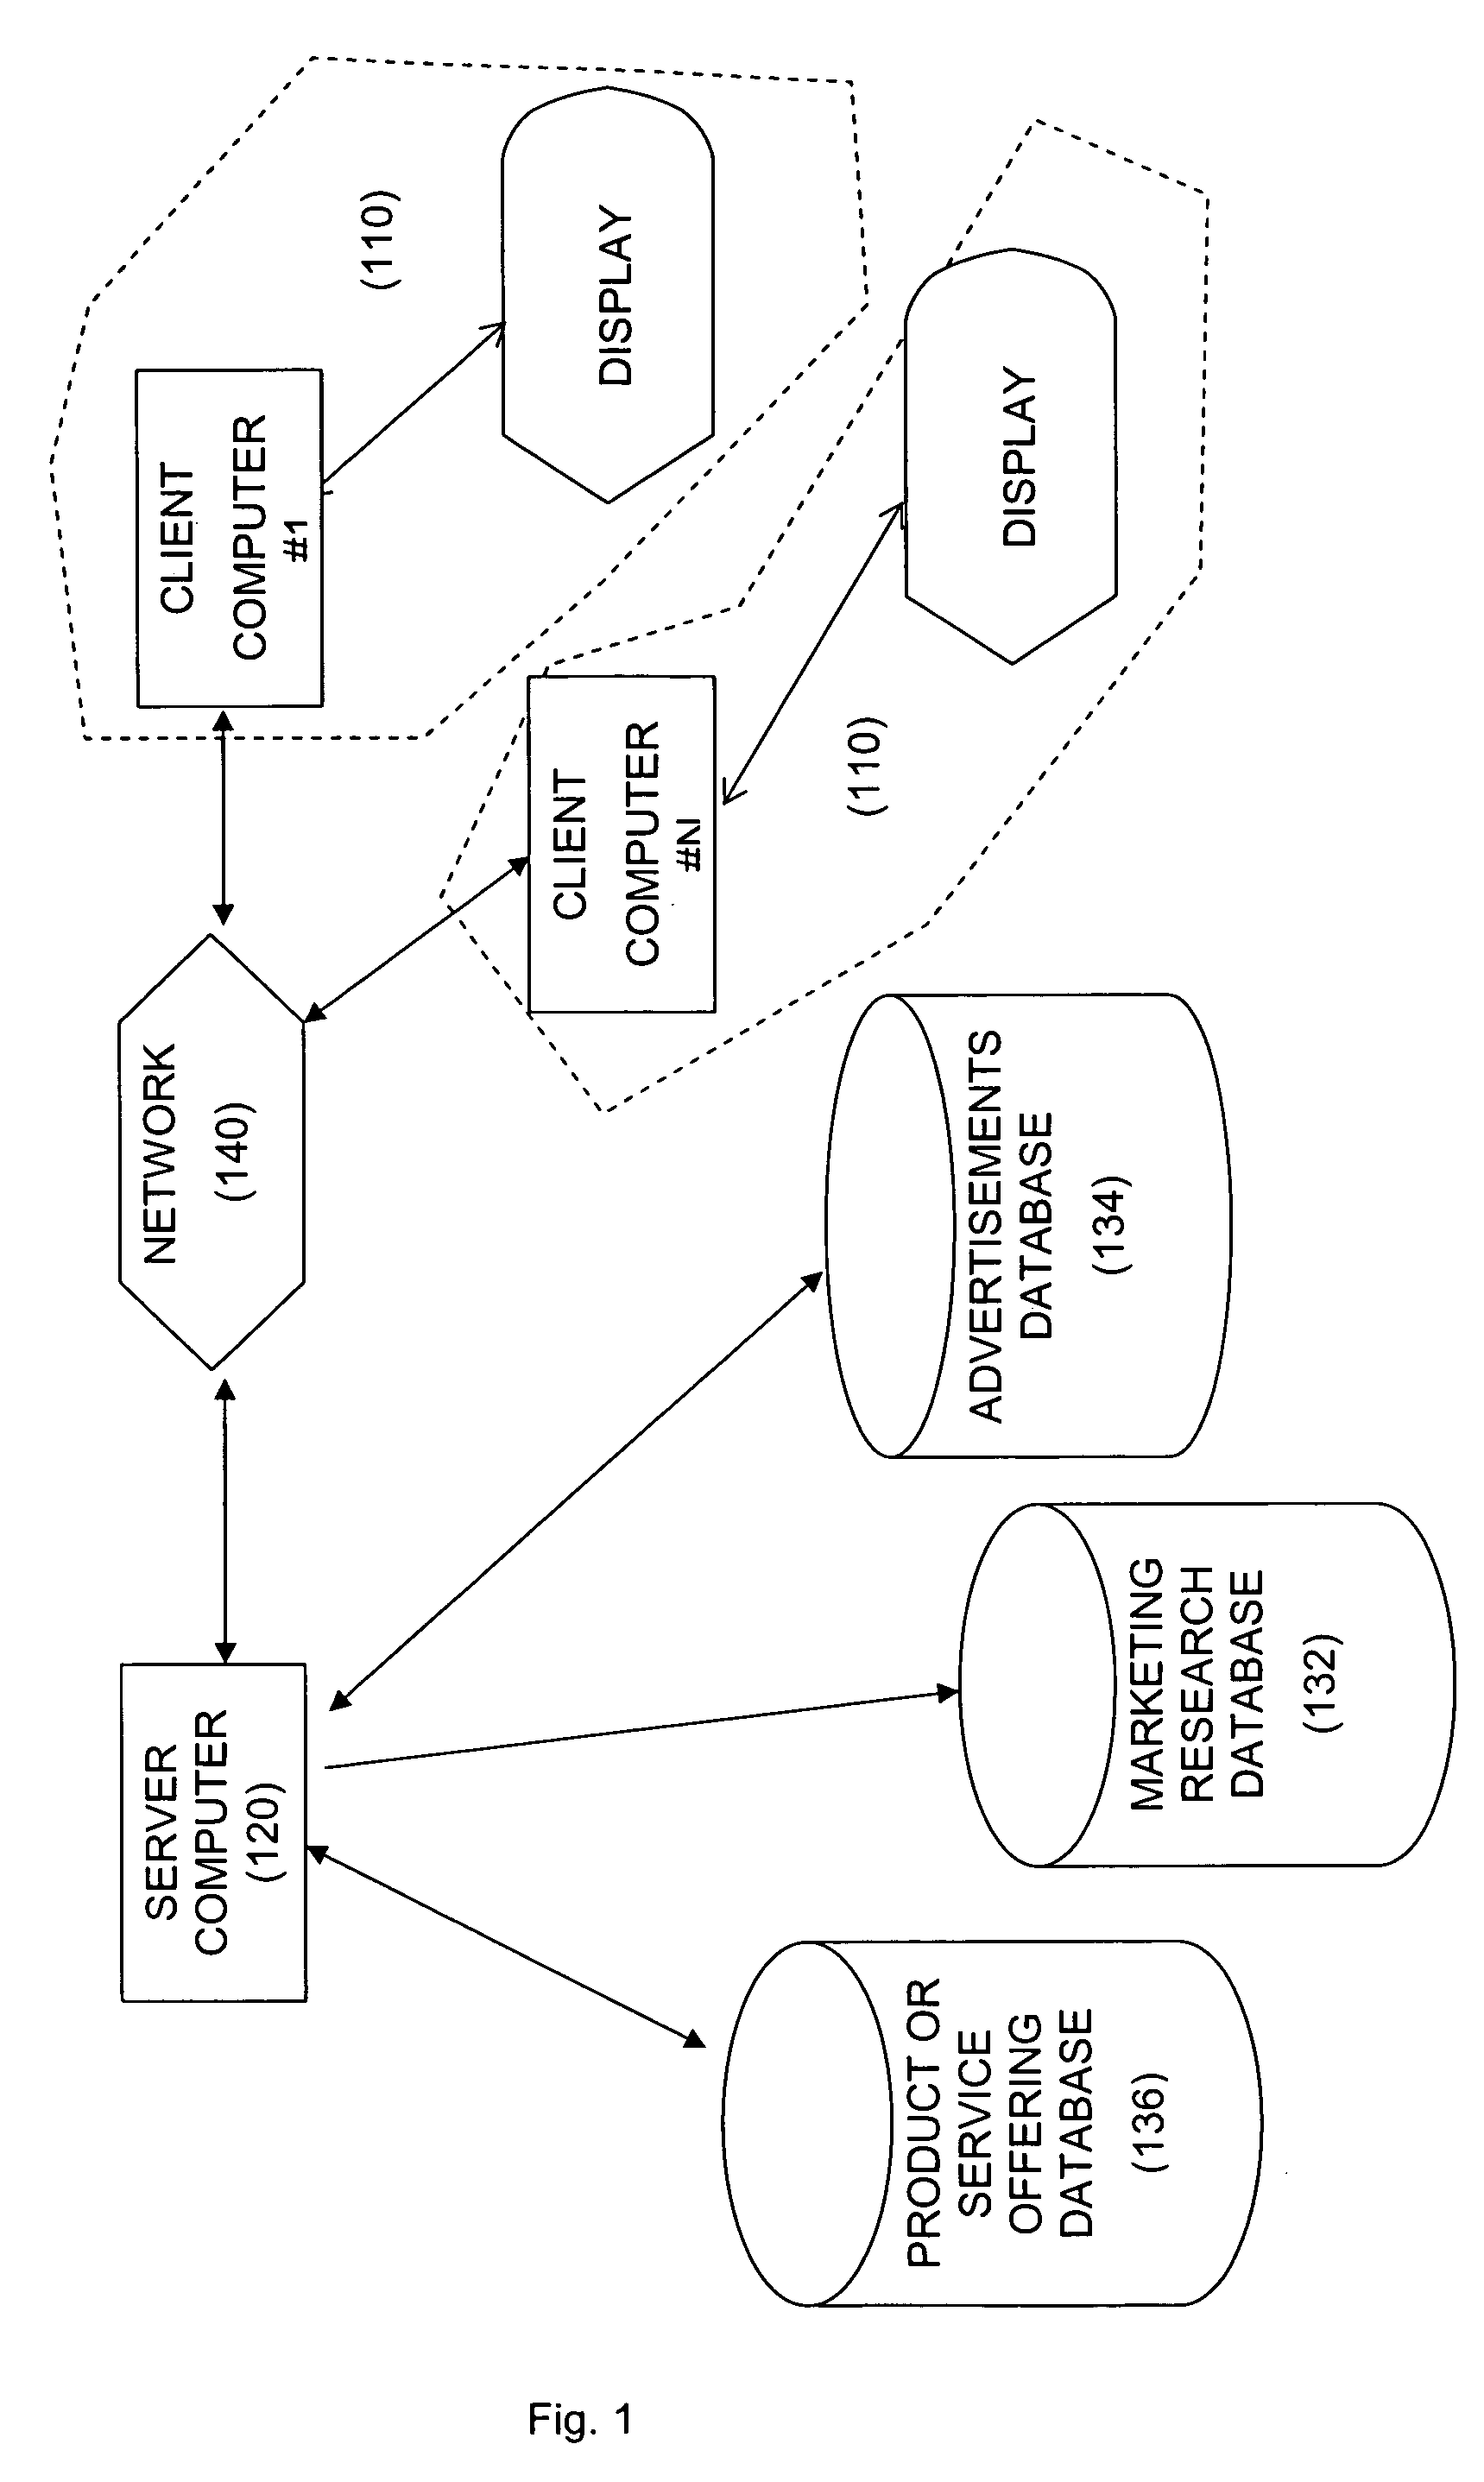 Method and apparatus for obtaining consumer product preferences through interactive product selection and evaluation